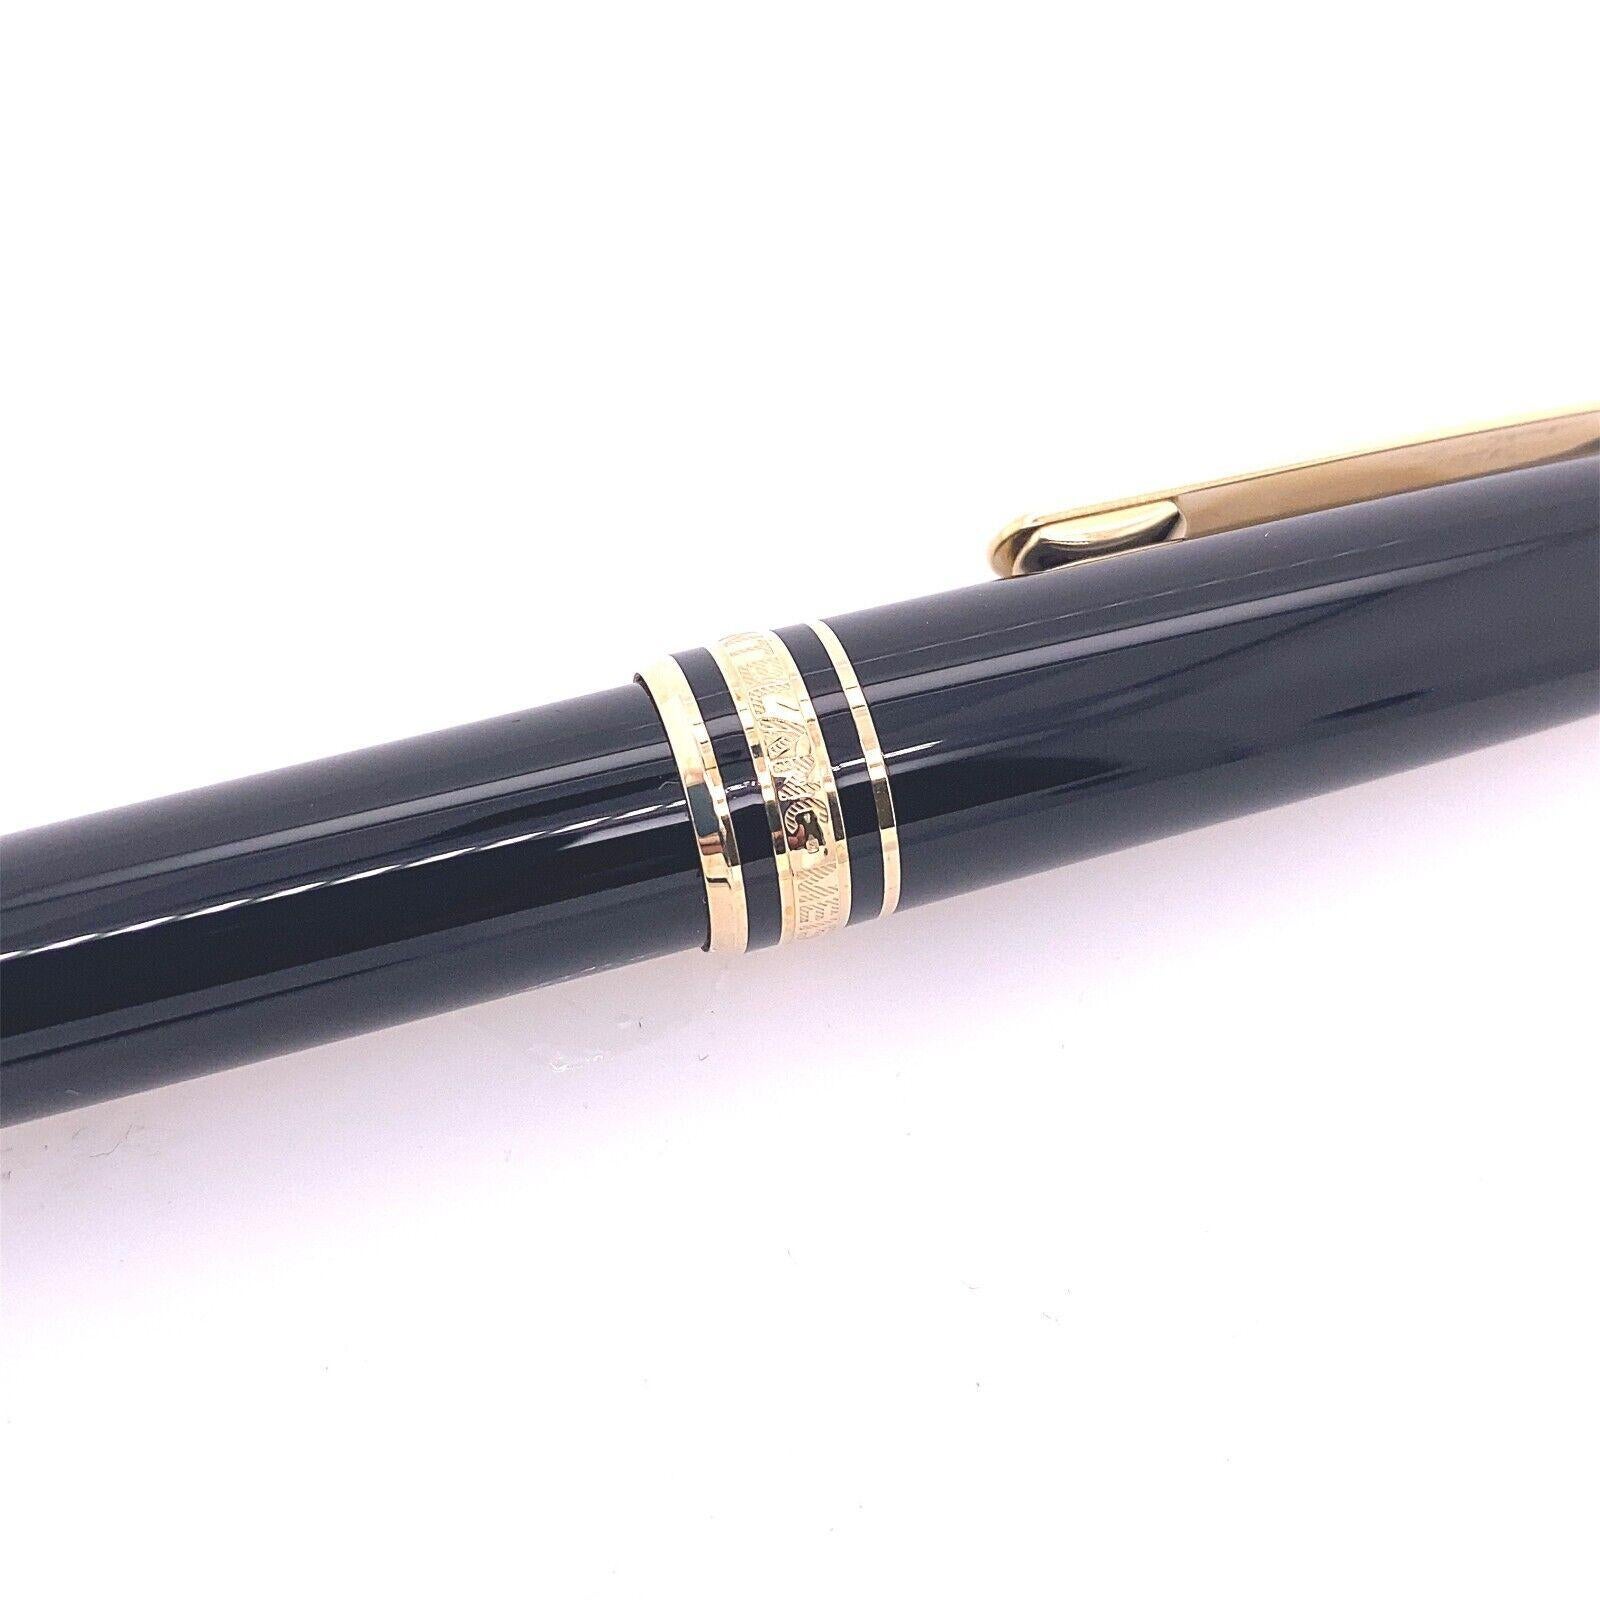 Montblanc's Meisterstück ballpoint pen is defined by quality craftsmanship.
A Montblanc pen is a symbol of a distinguished writing instrument, you can make your writing a work of art. details to achieve a luxurious finish. With original box and